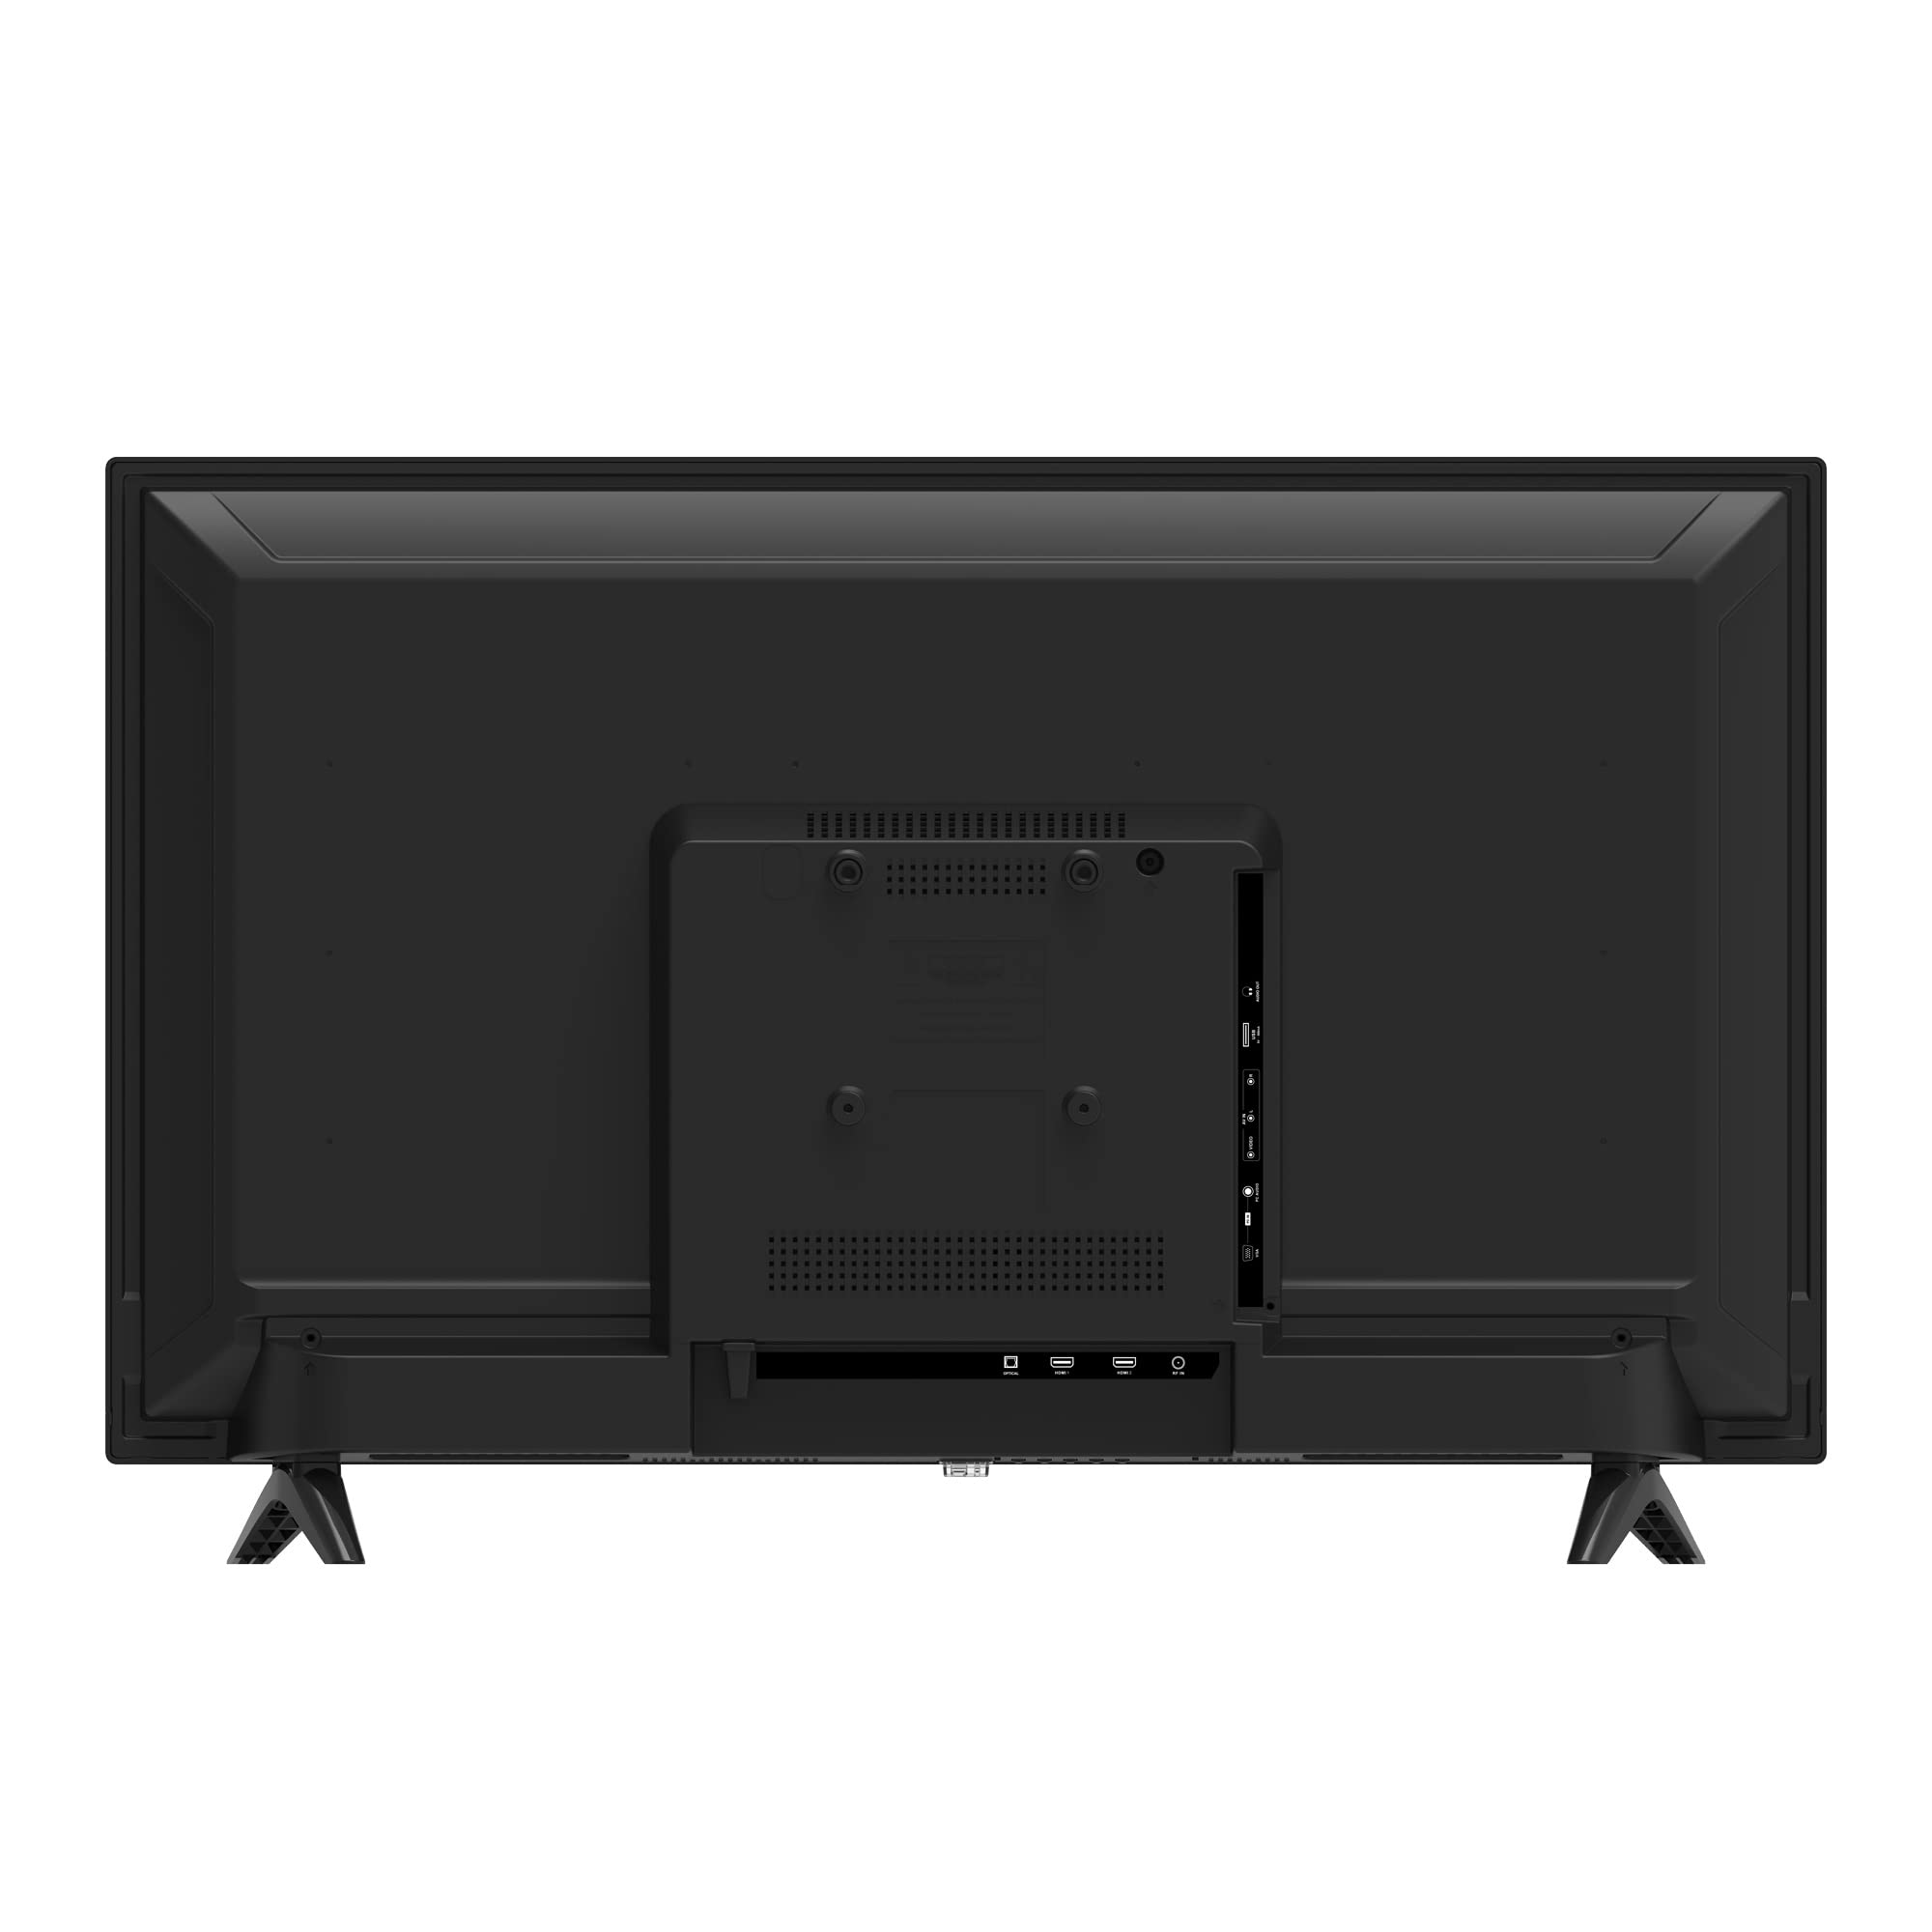 Westinghouse HD 32 Inch TV, Slim, Compact 720p LED Flat Screen TV with Built-in HDMI, USB, VGA, and V-Chip, High Definition Small TV and Monitor for Home or Office, 2022 Model